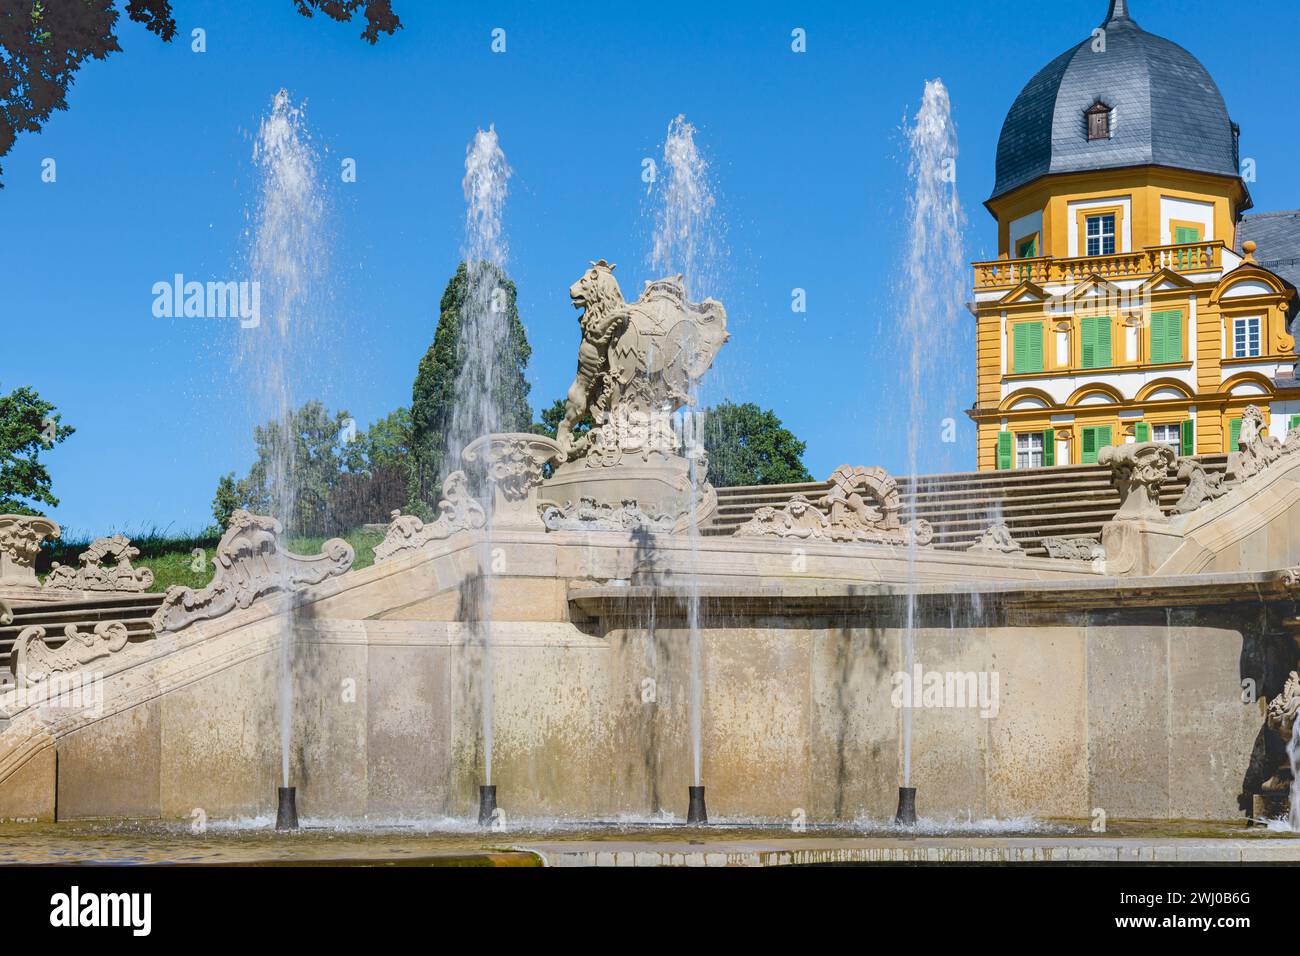 Seehof Castle near Bamberg. Fountain with water features, Germany Stock Photo